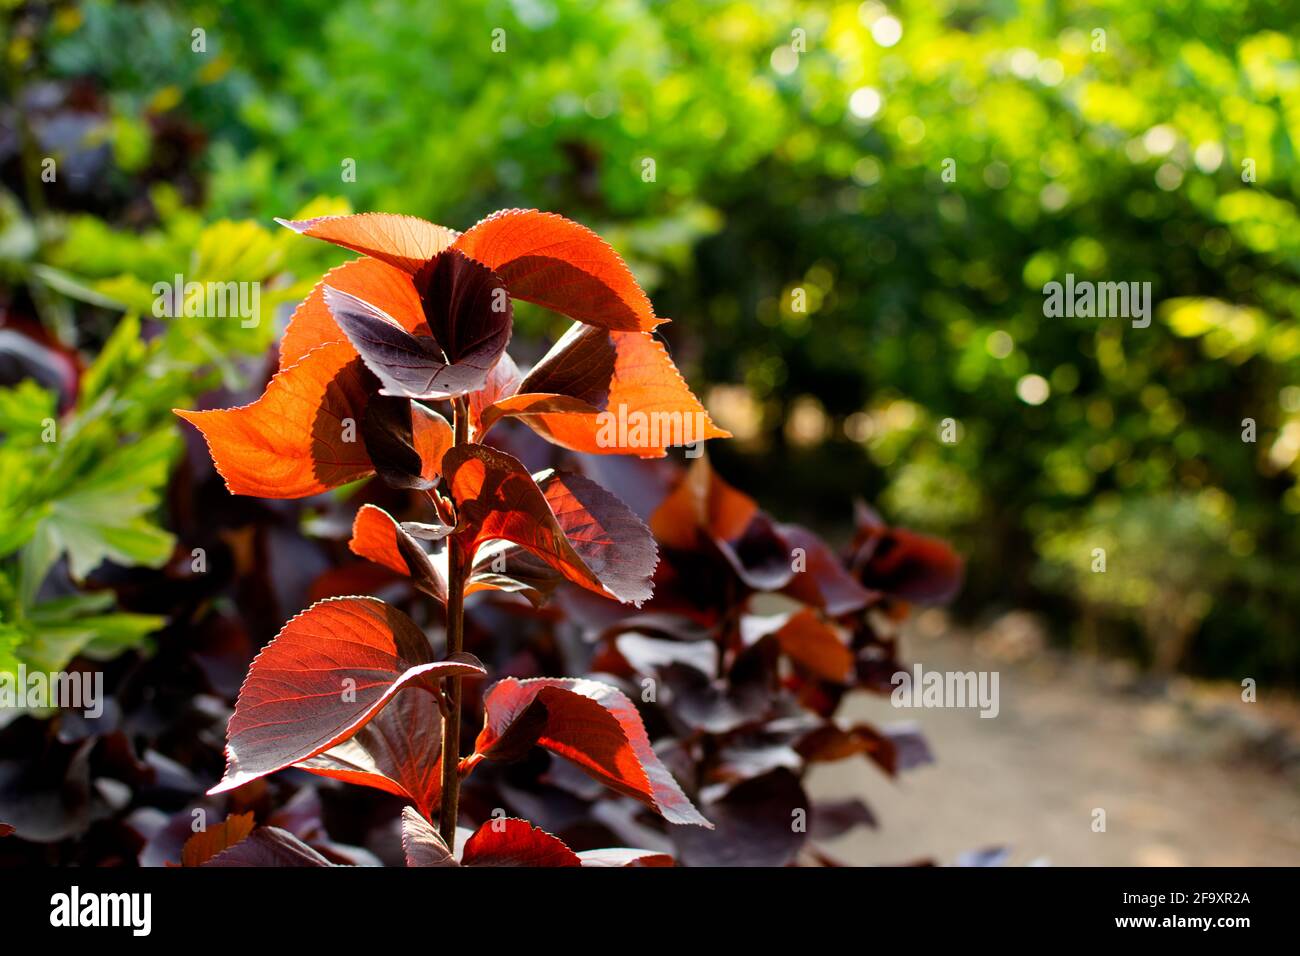 Copper leaf plant also known as acalypha with green bokeh background. Stock Photo